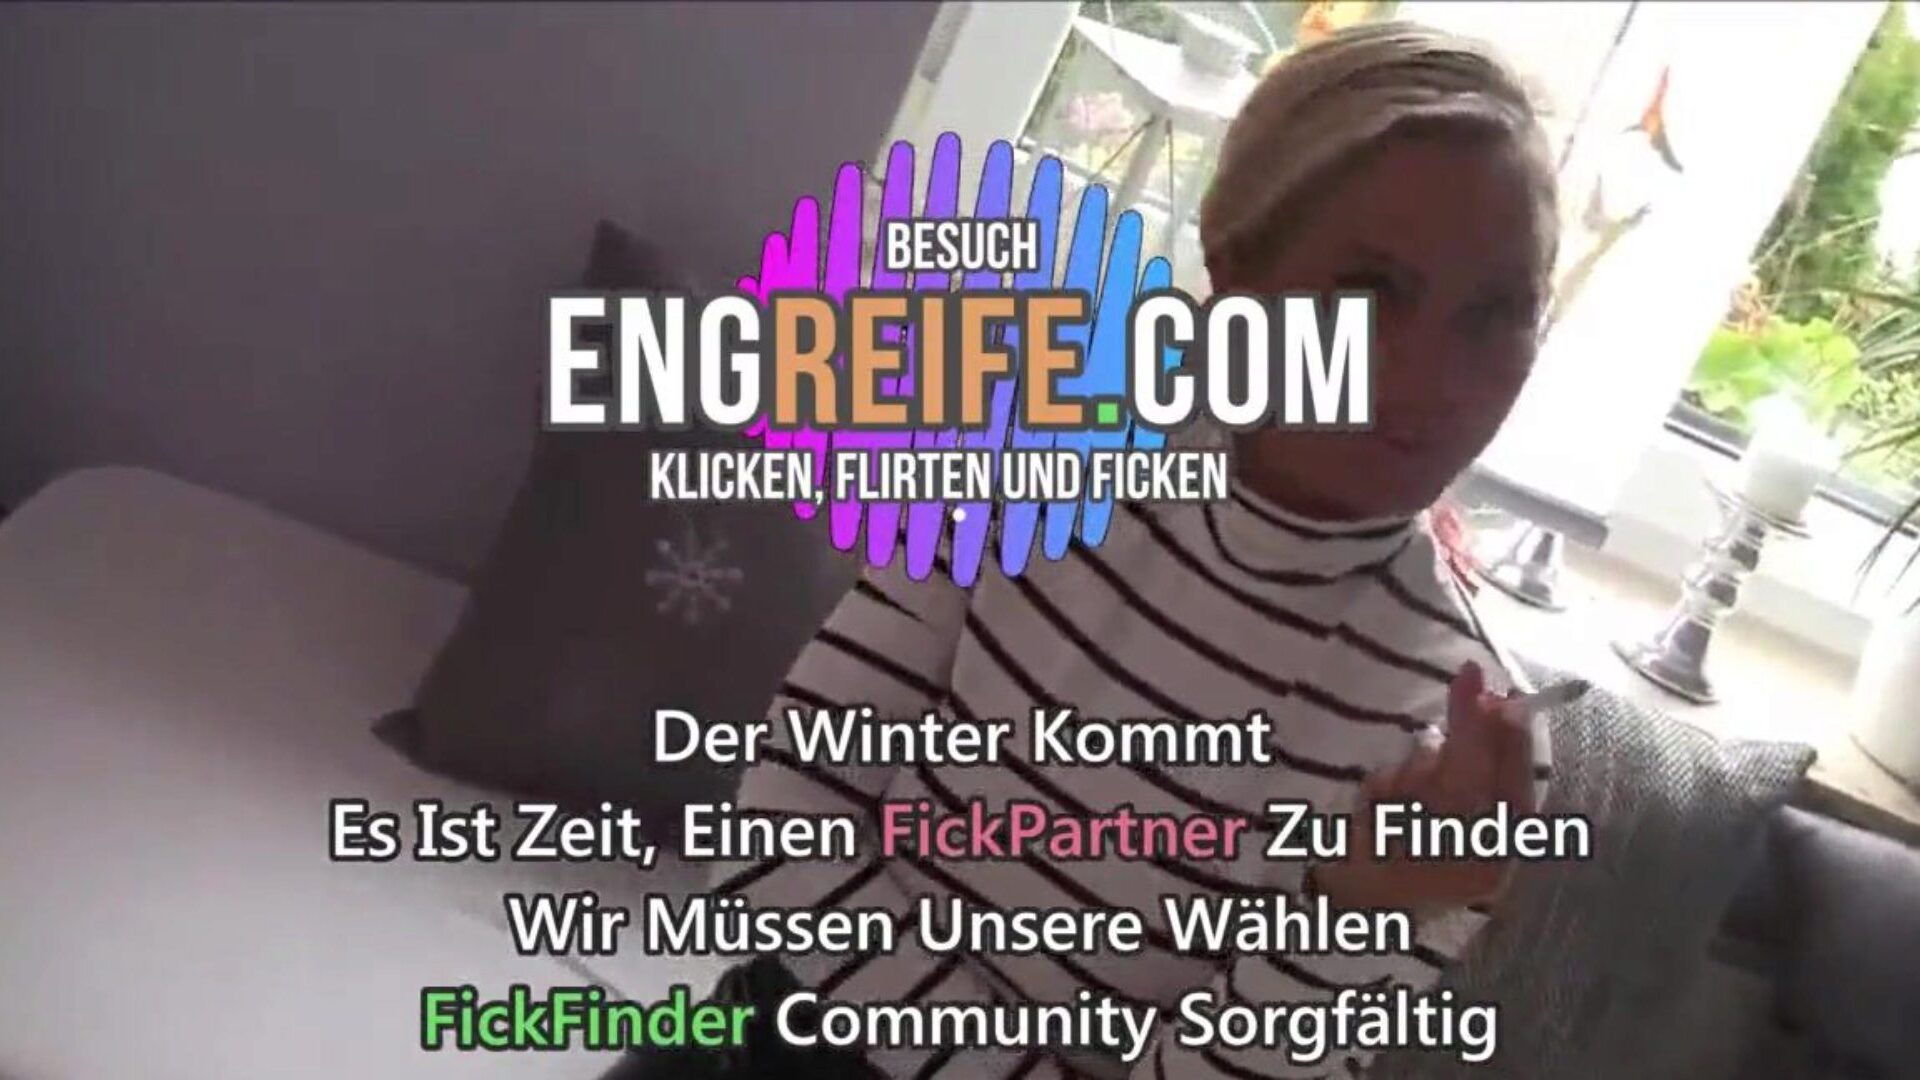 Sperma Vom Jungen Mann Ist Gesund Fur mother I'd like to fuck Free HD Porn 99 Watch Sperma Vom Jungen Mann Ist Gesund Fur mother I'd like to fuck clip on xHamster - the ultimate collection of free German Utube Free HD hardcore porno tube videos